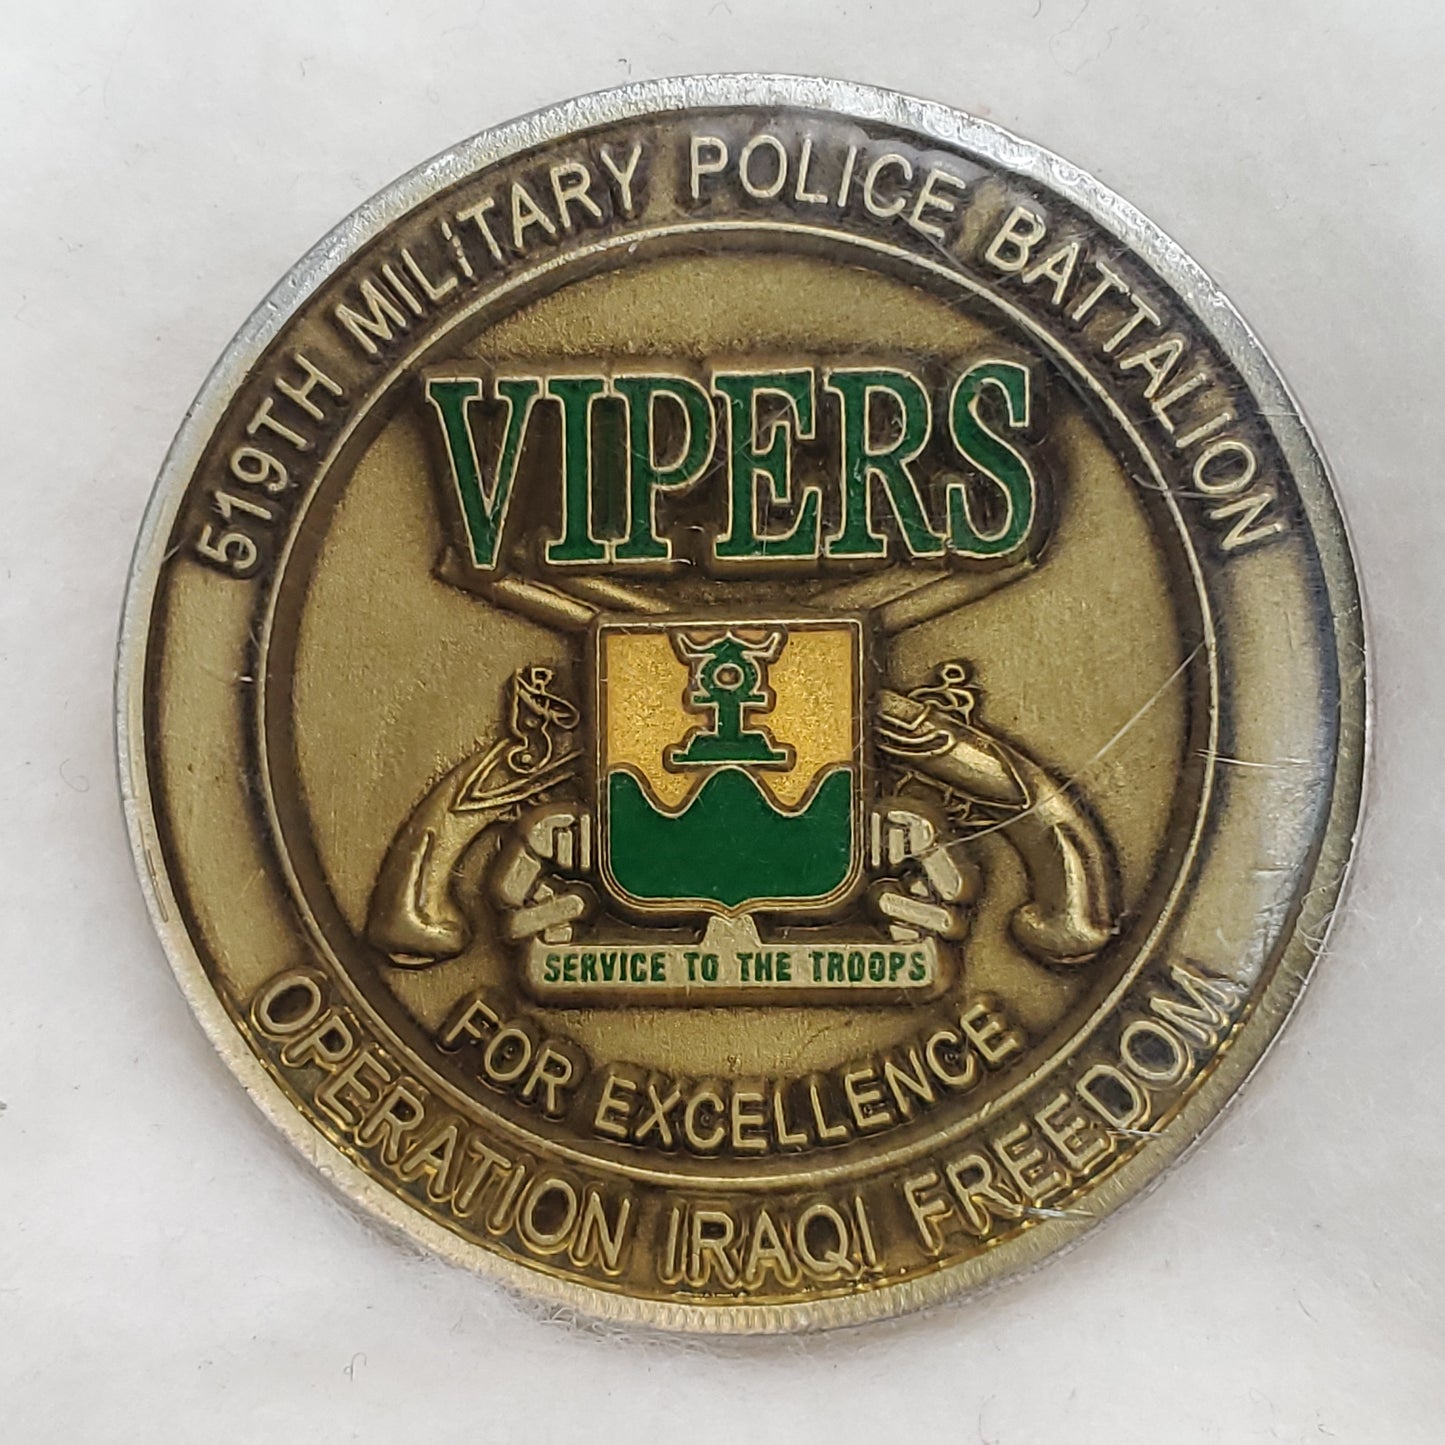 519th Military Police Battalion "Vipers" Challenge Coin (B4)